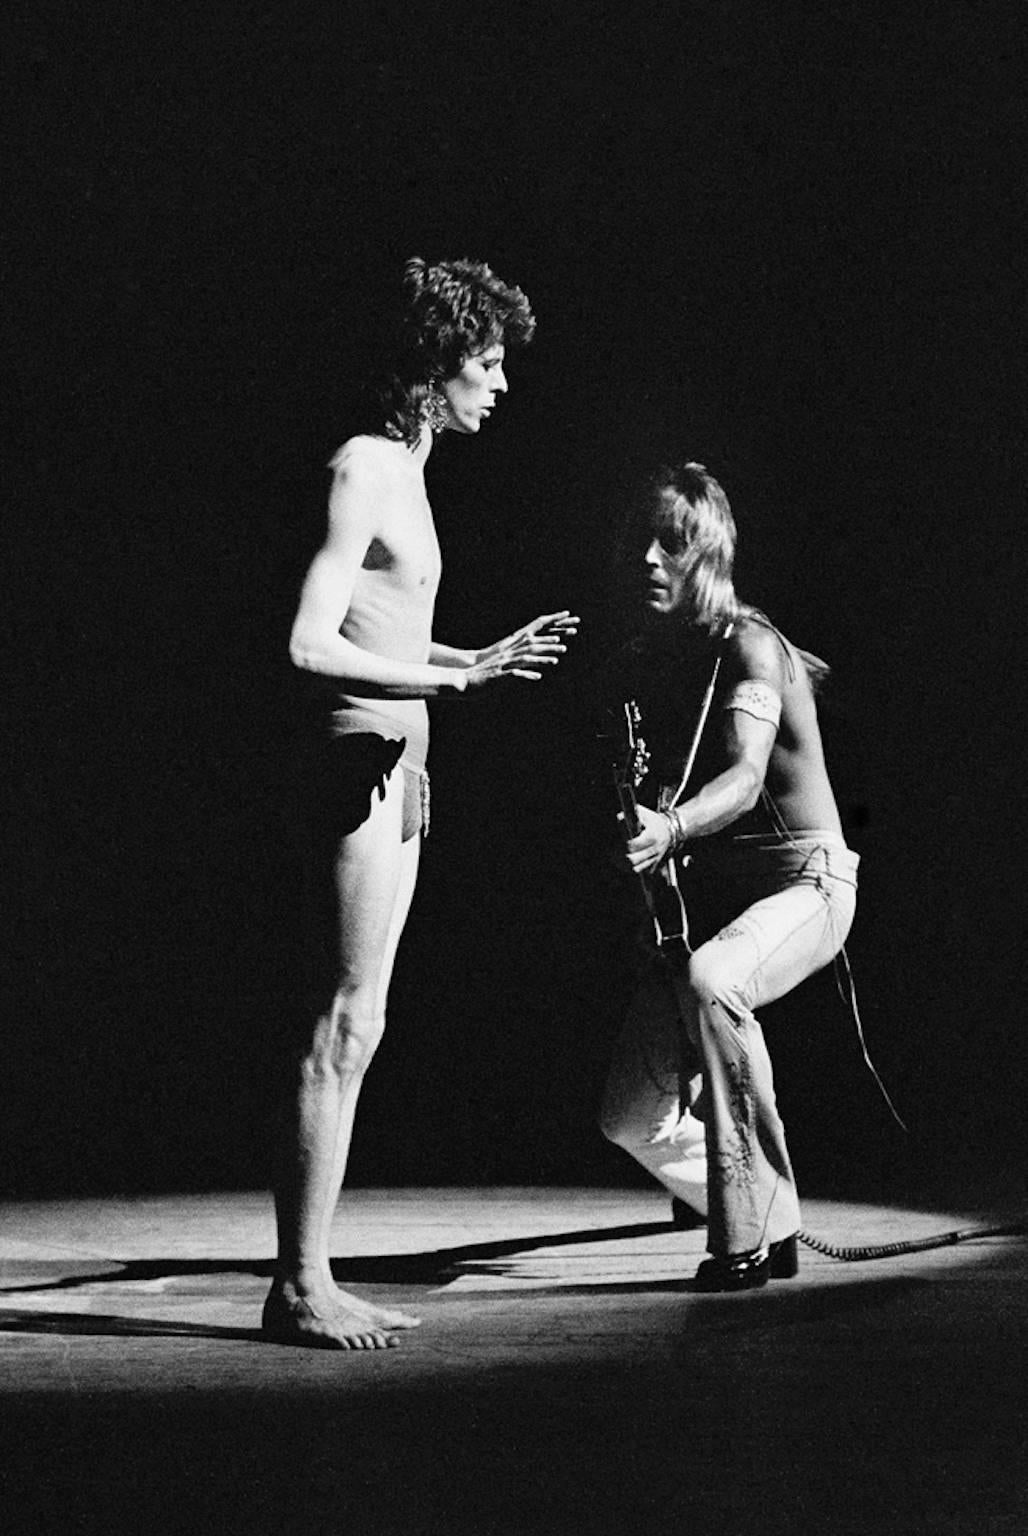 "Bowie and Ronson on the Stage" - Photograph by Masayoshi Sukita